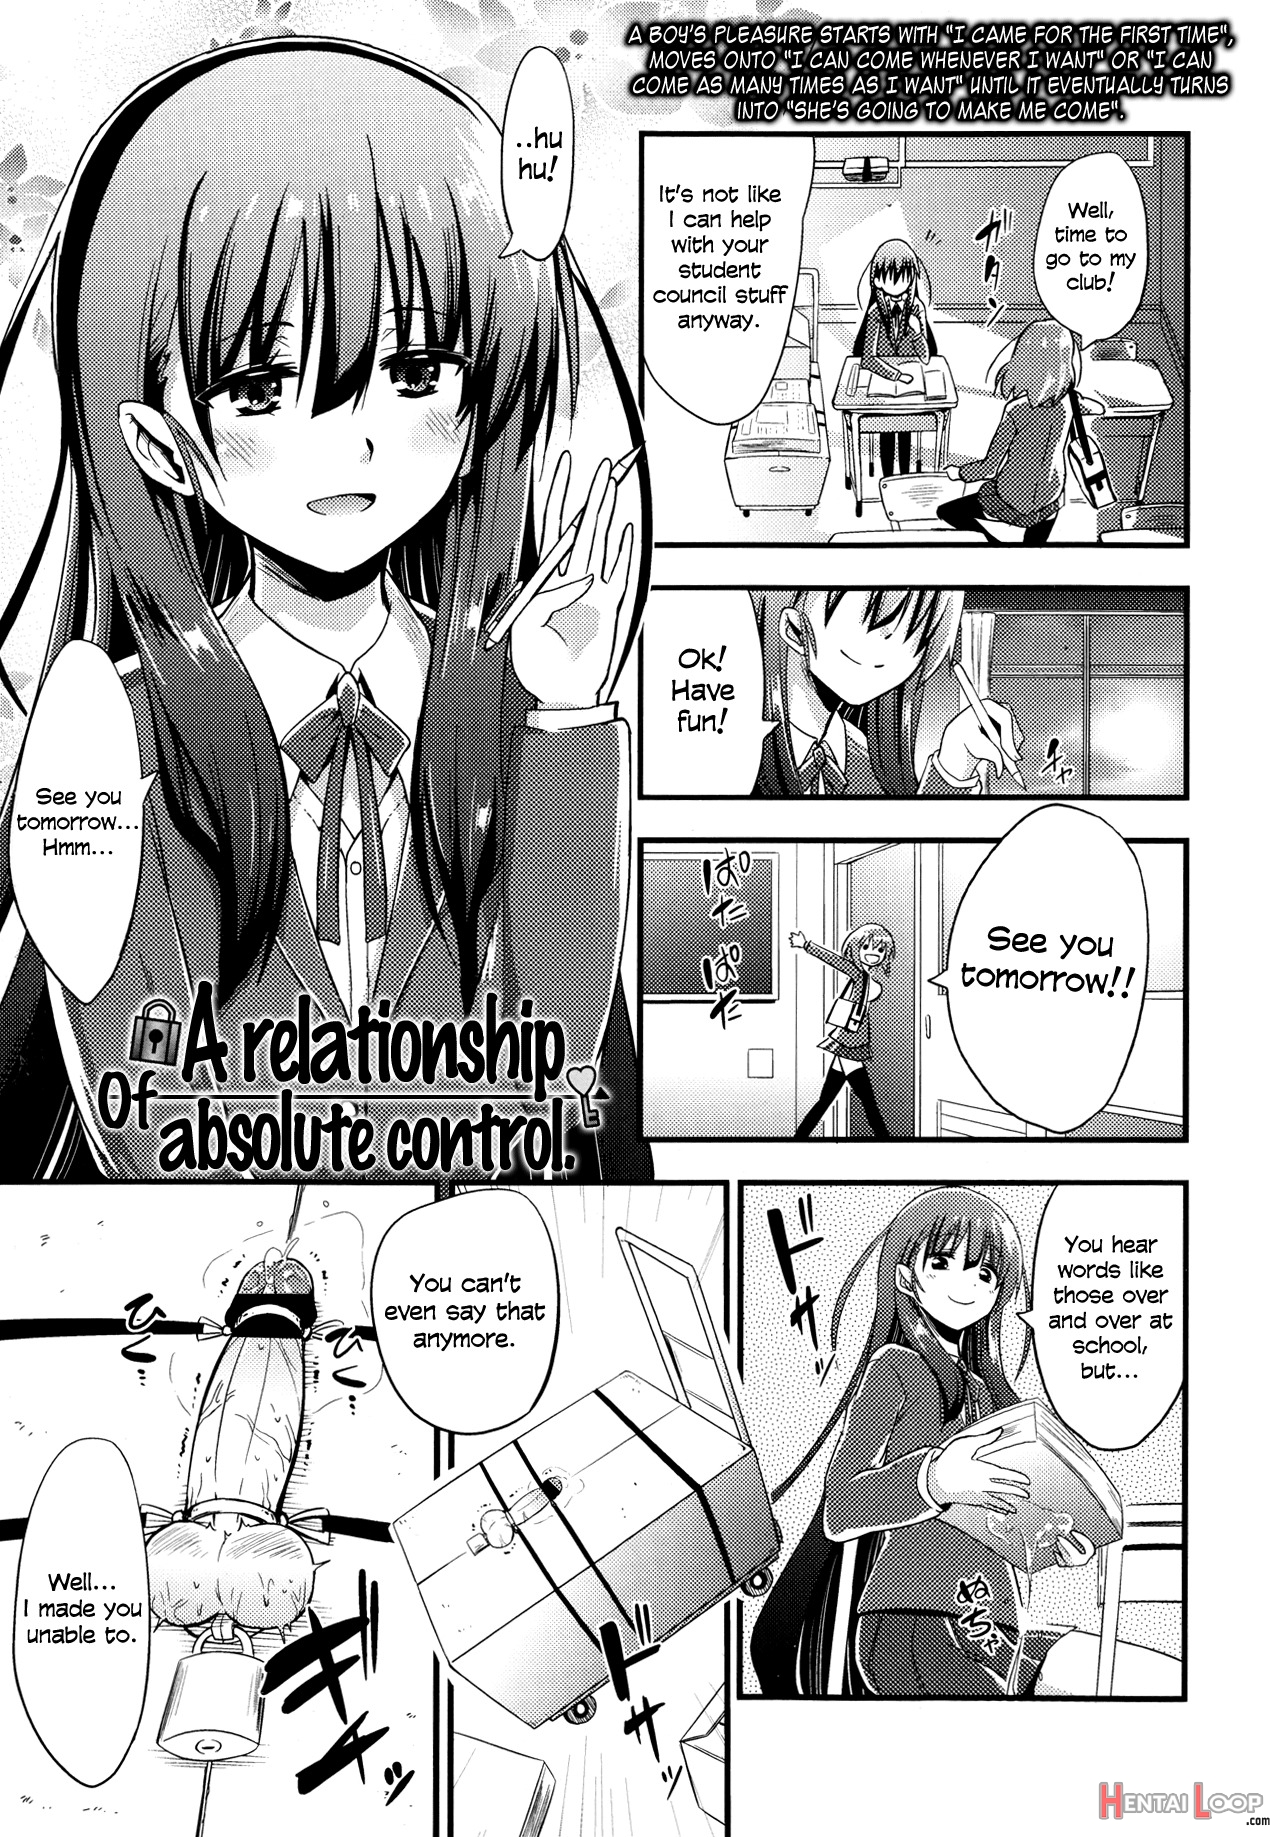 A Relationship Of Absolute Control page 1